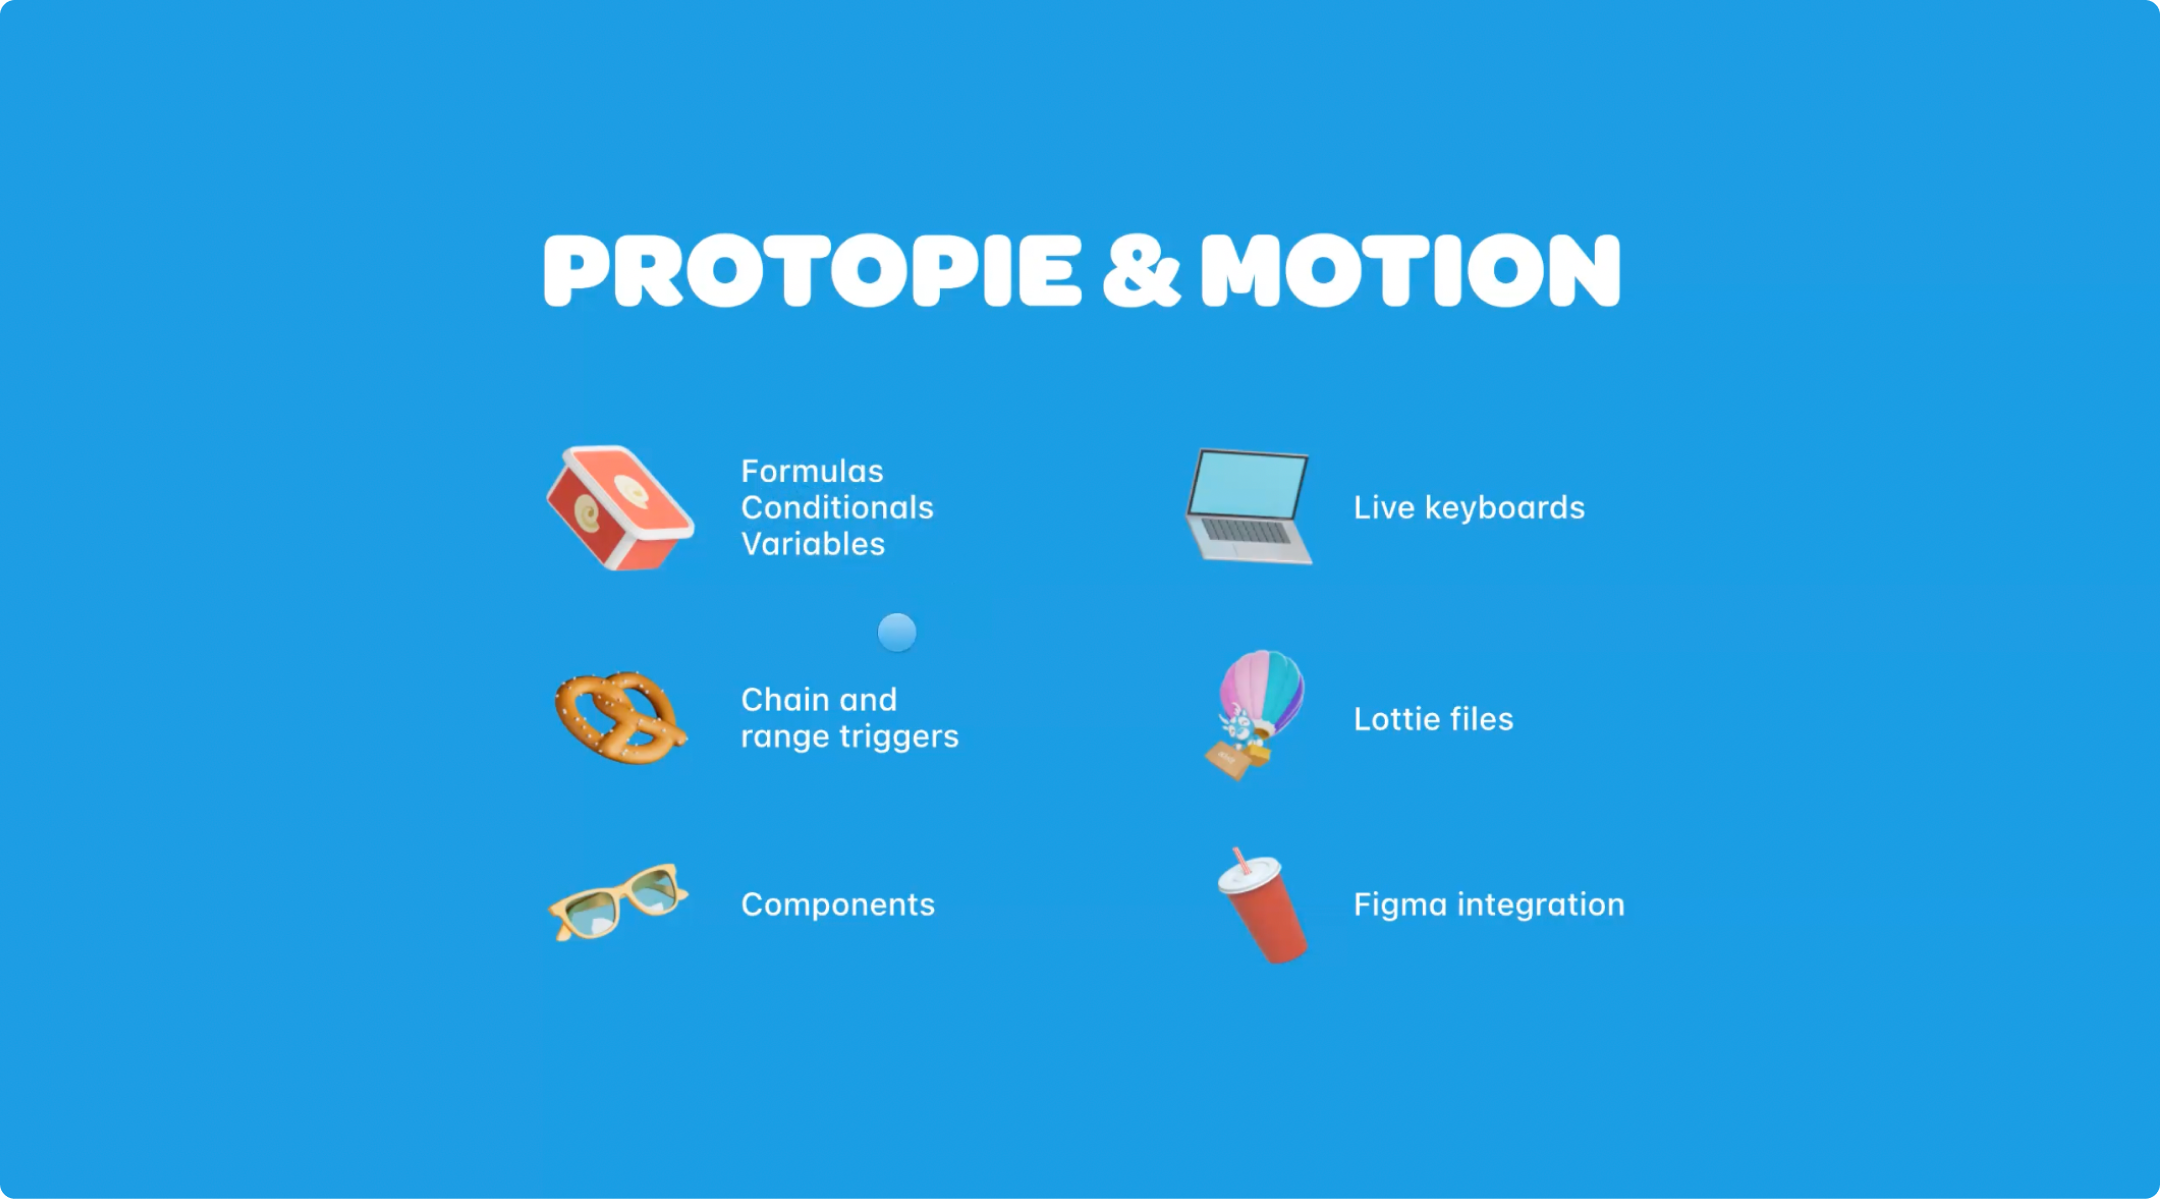 ProtoPie’s main features used by Wolt designers.